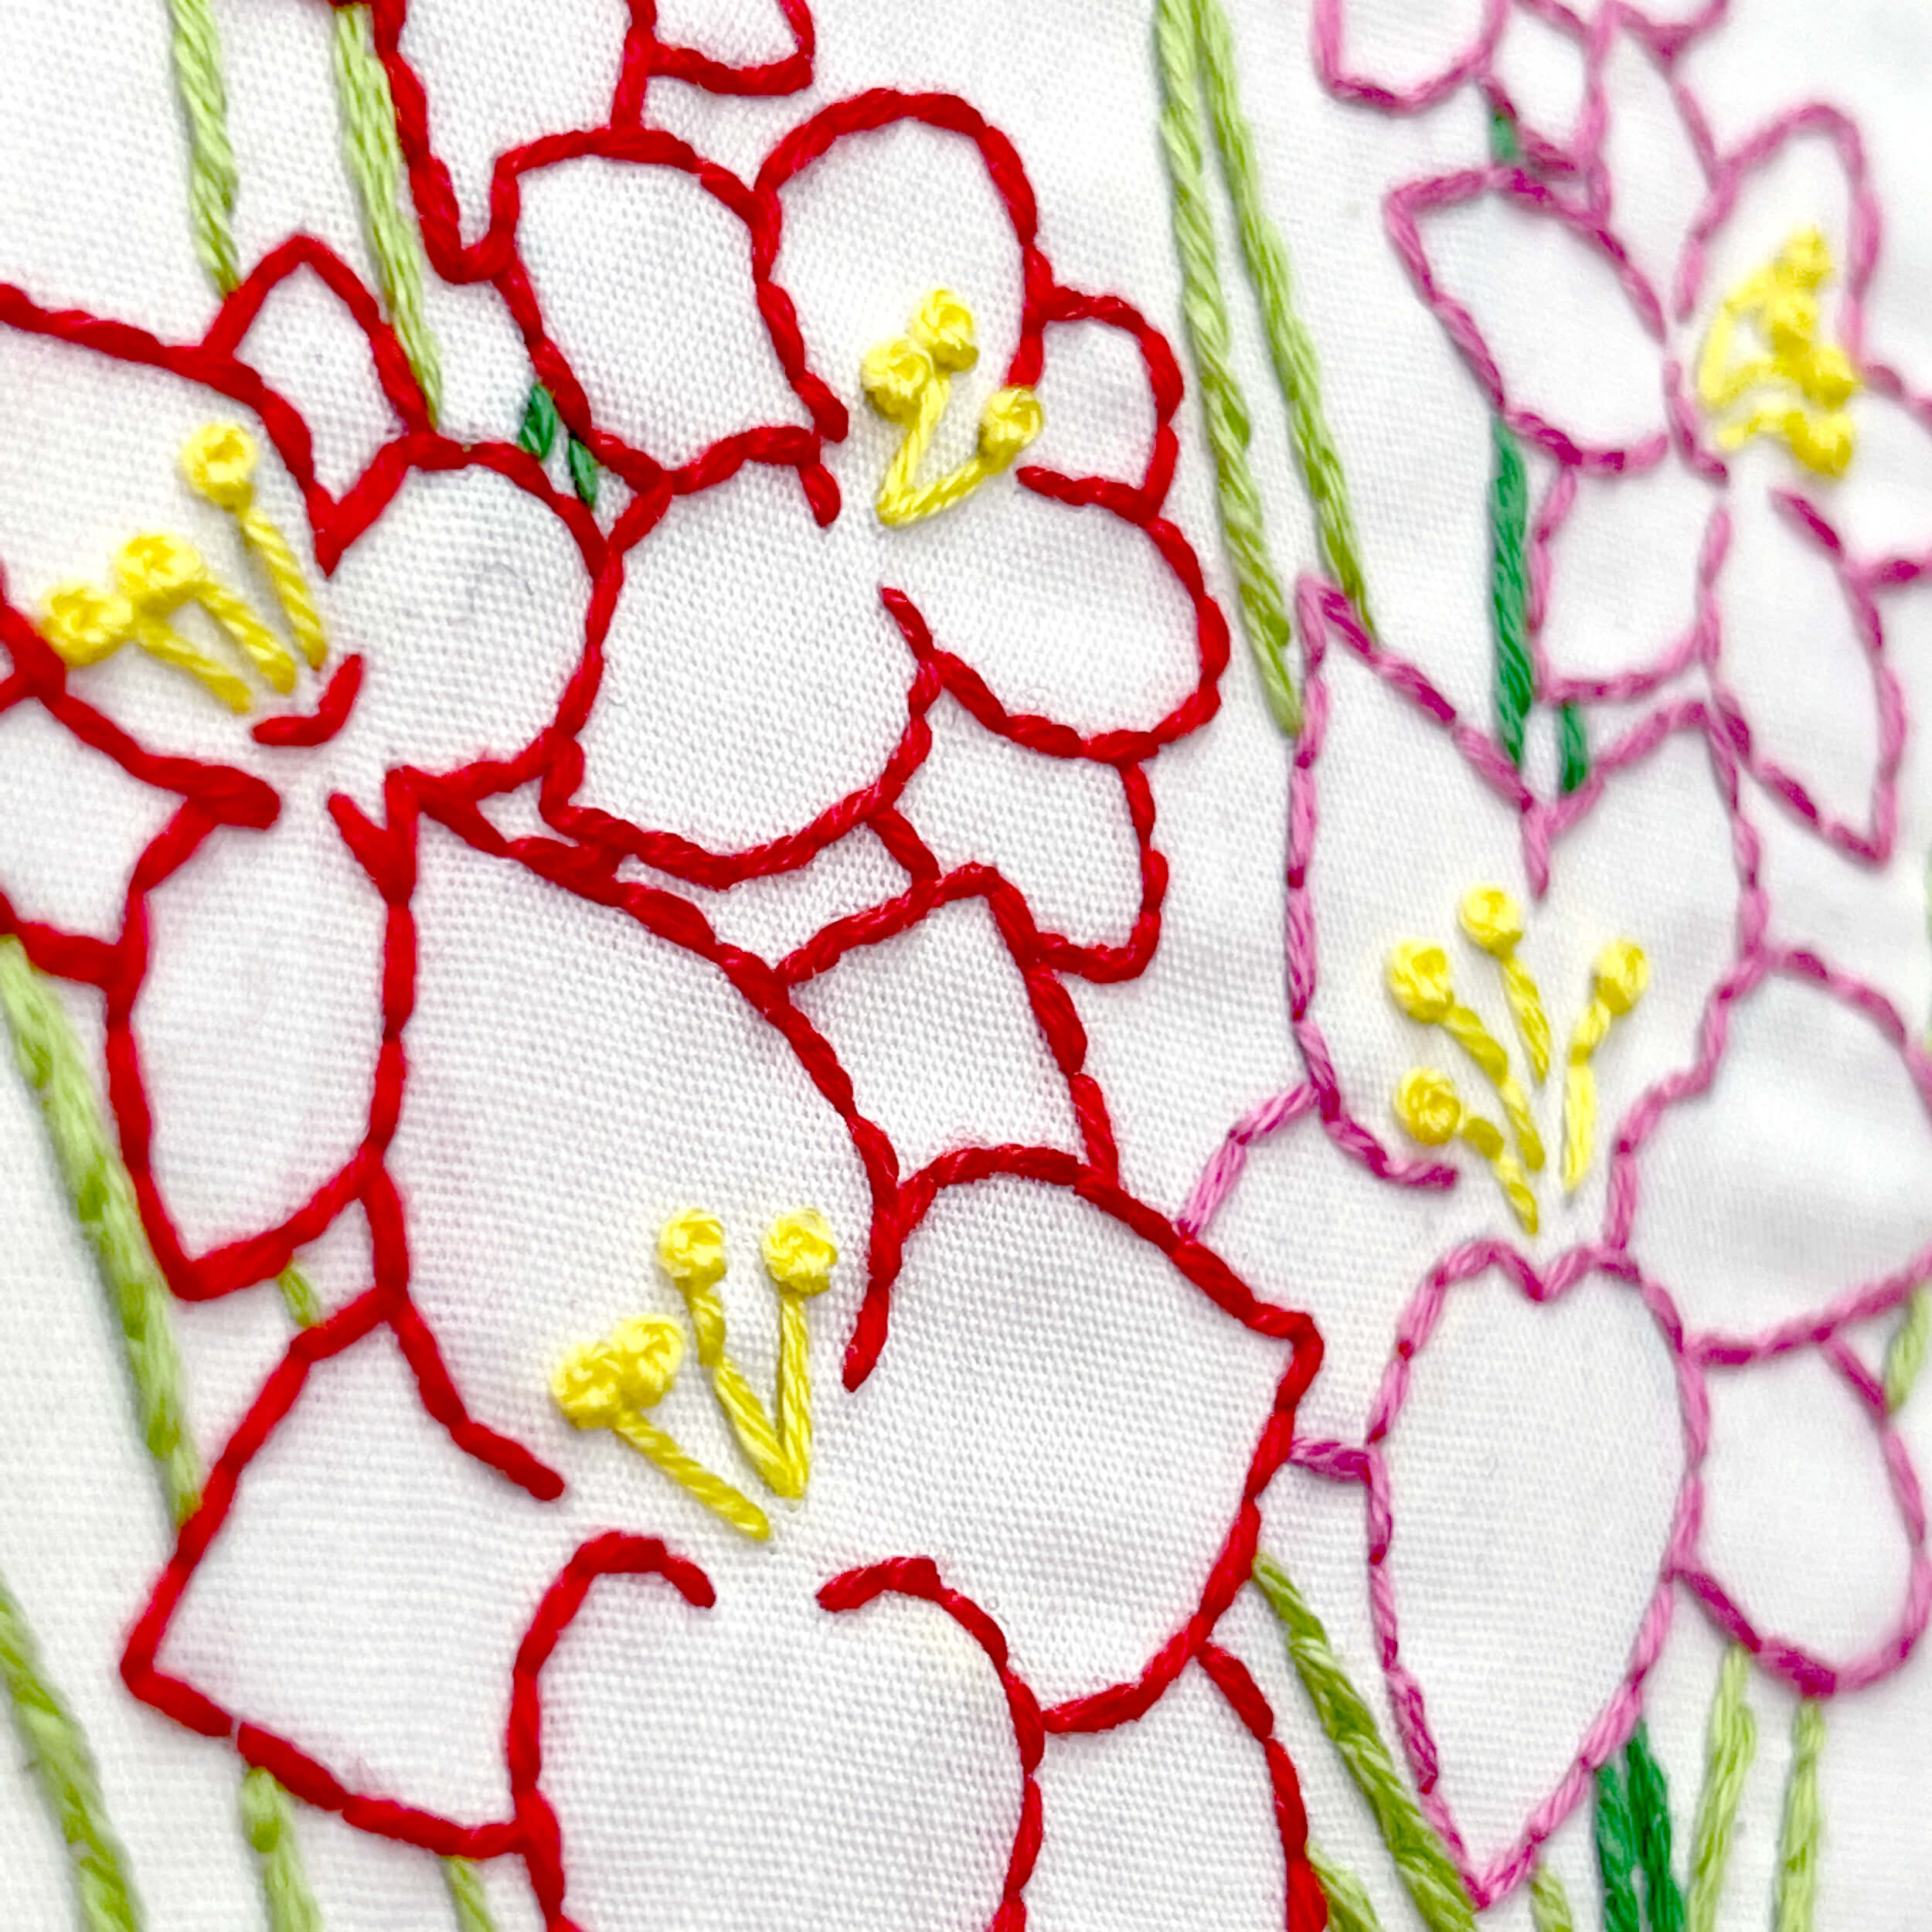 close up of gladiolus backstitch embroidery in red.